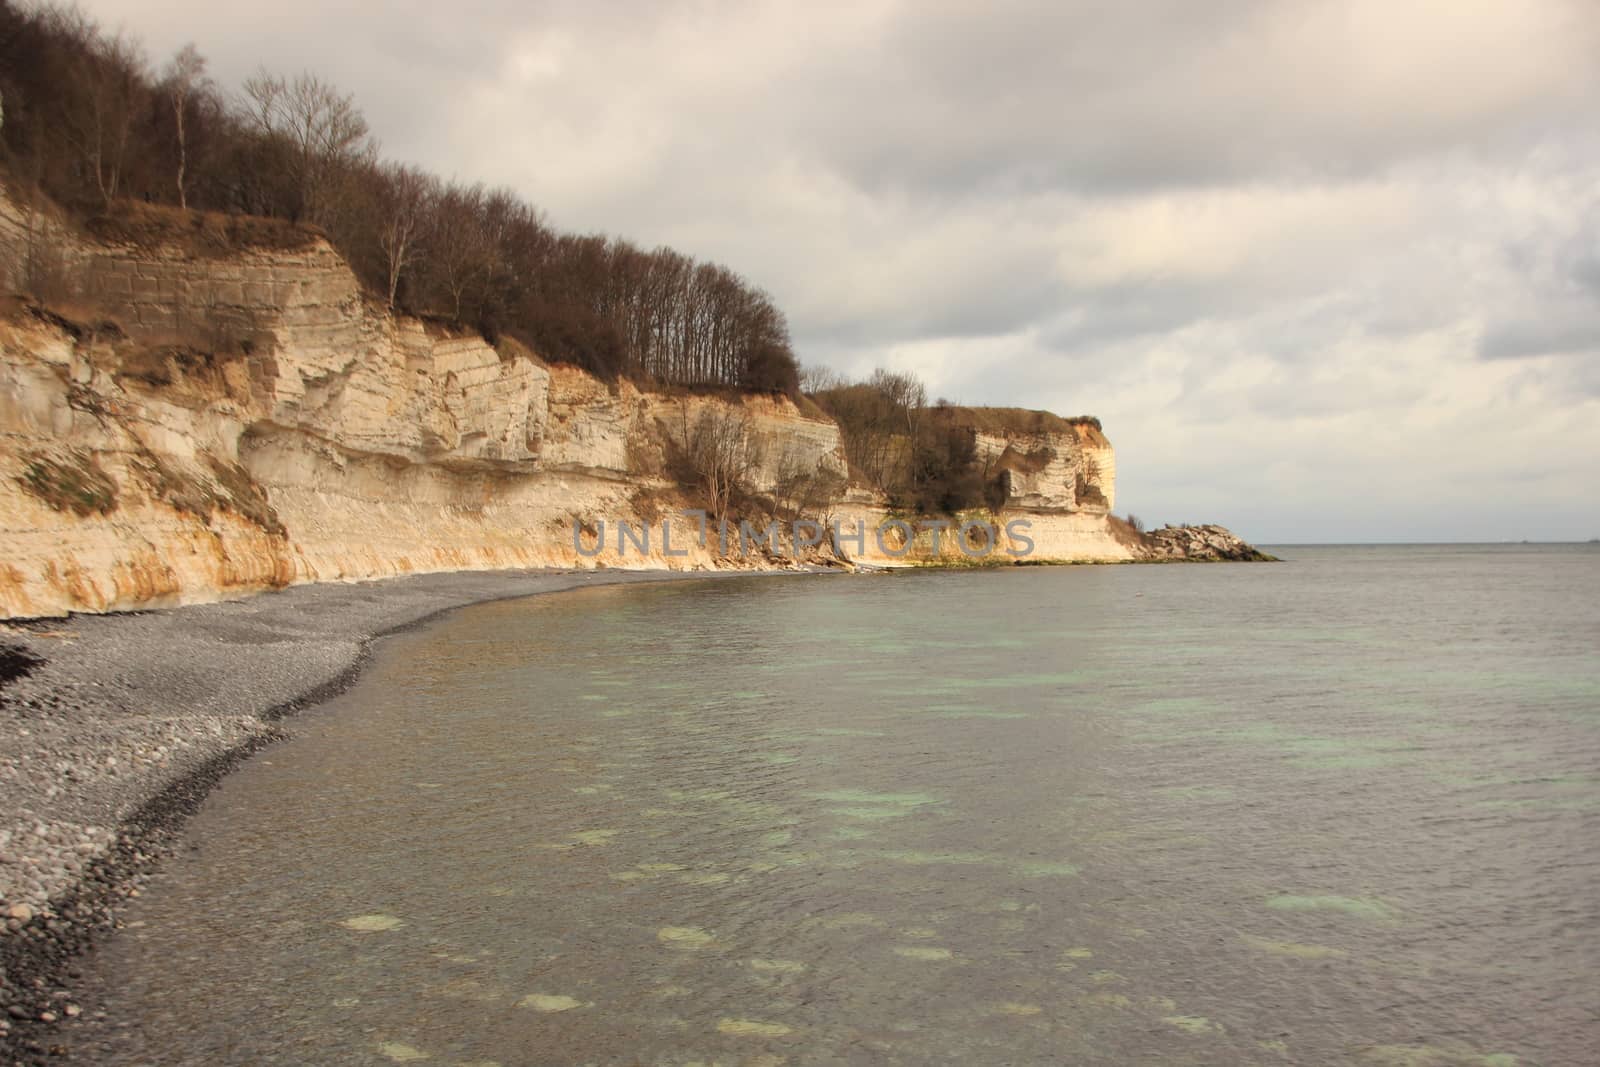 Denmarks Stevns Klint Coastline at sea level with White Cliff and Reflections from Limestone Clay